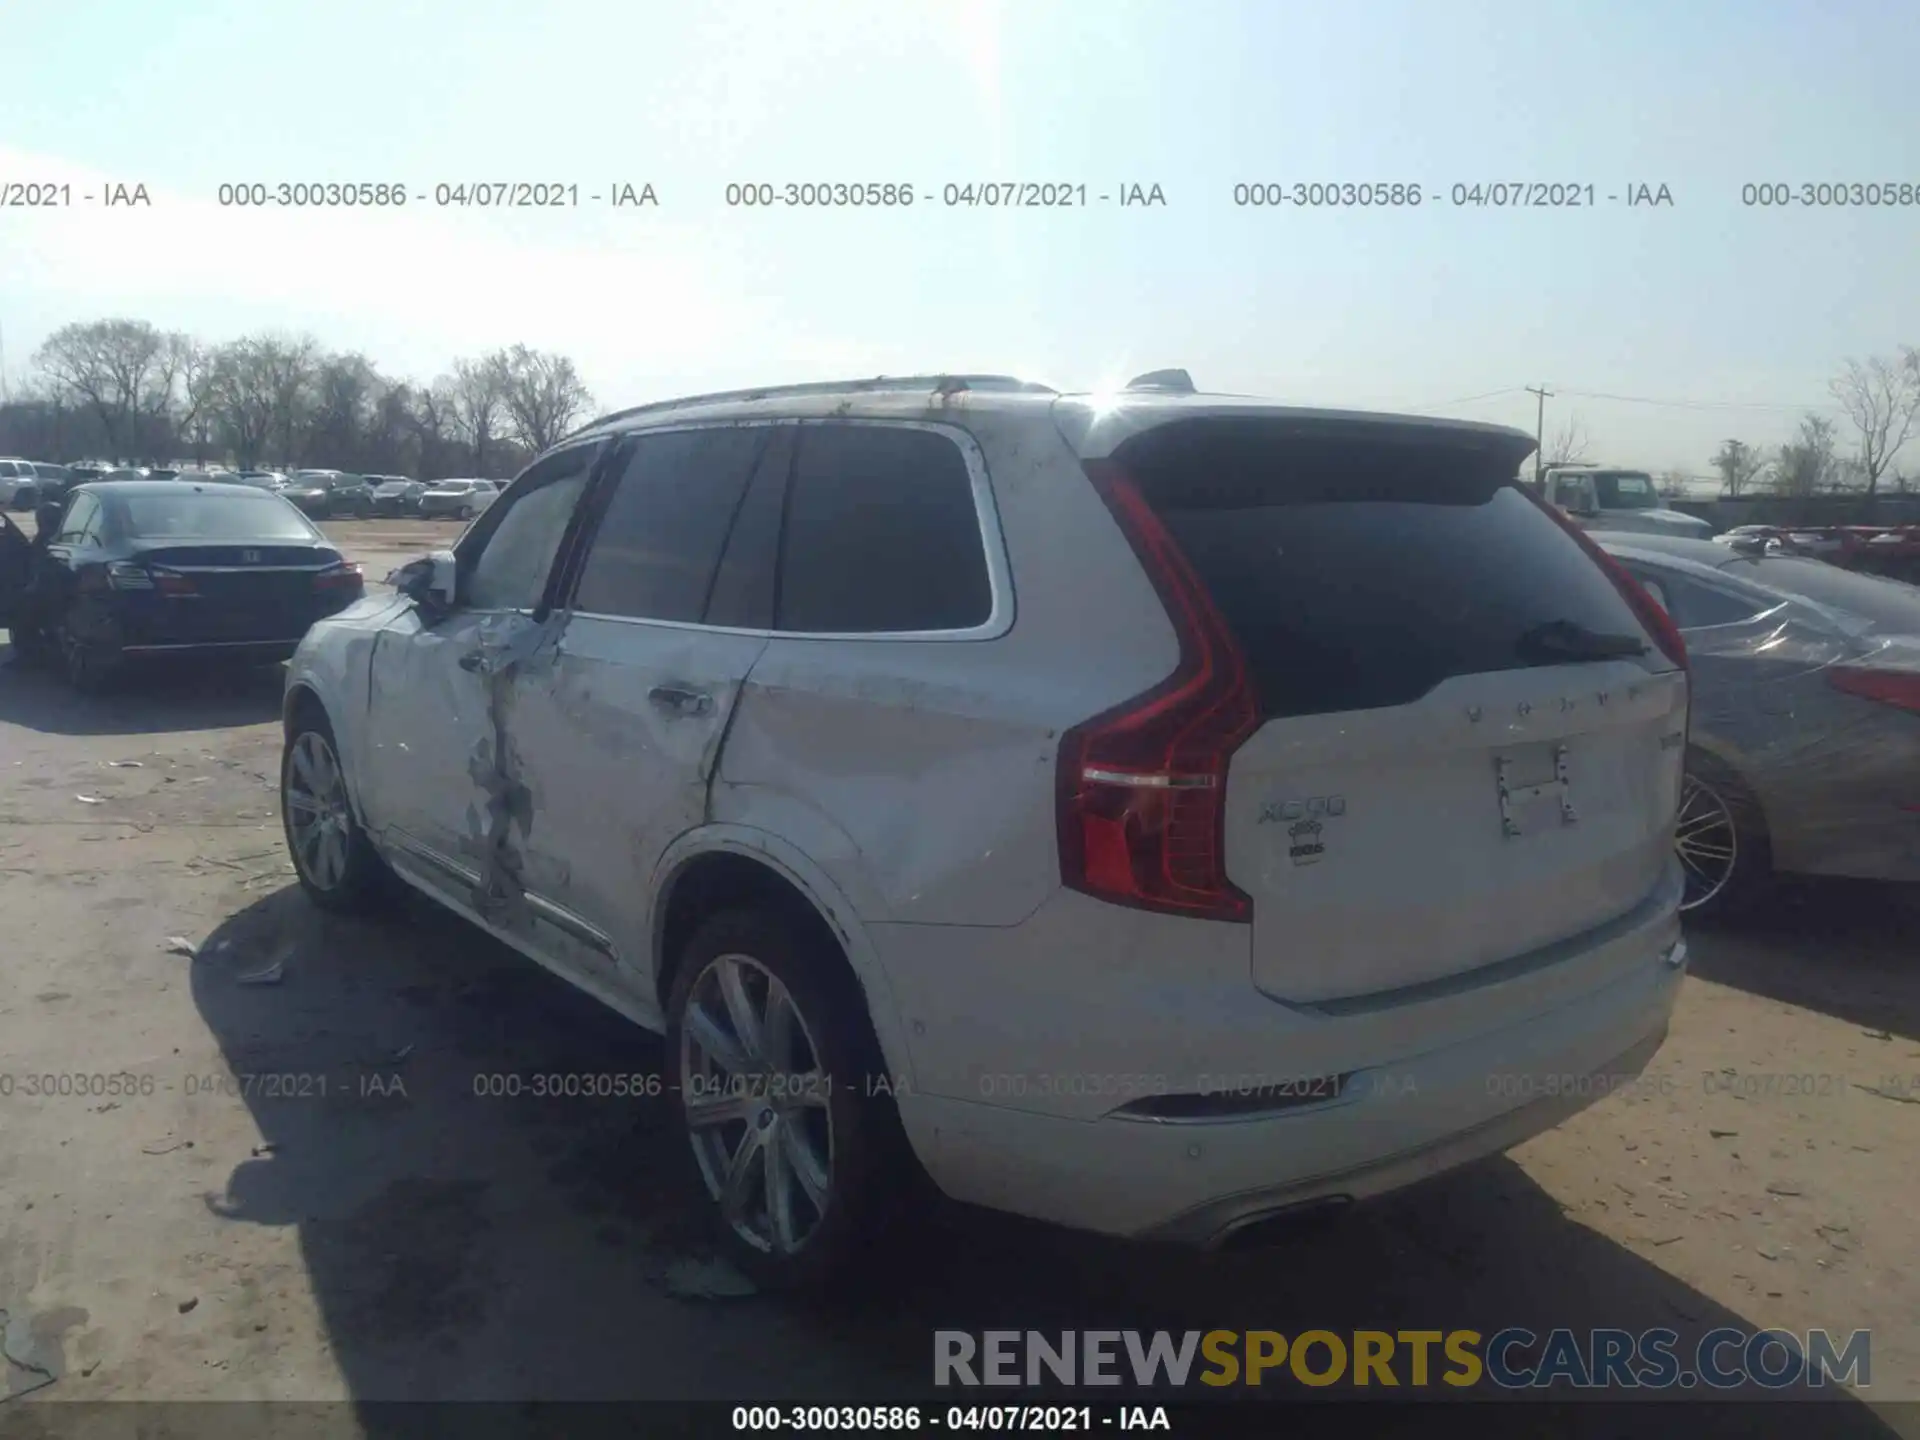 3 Photograph of a damaged car YV4A22PL2K1490722 VOLVO XC90 2019